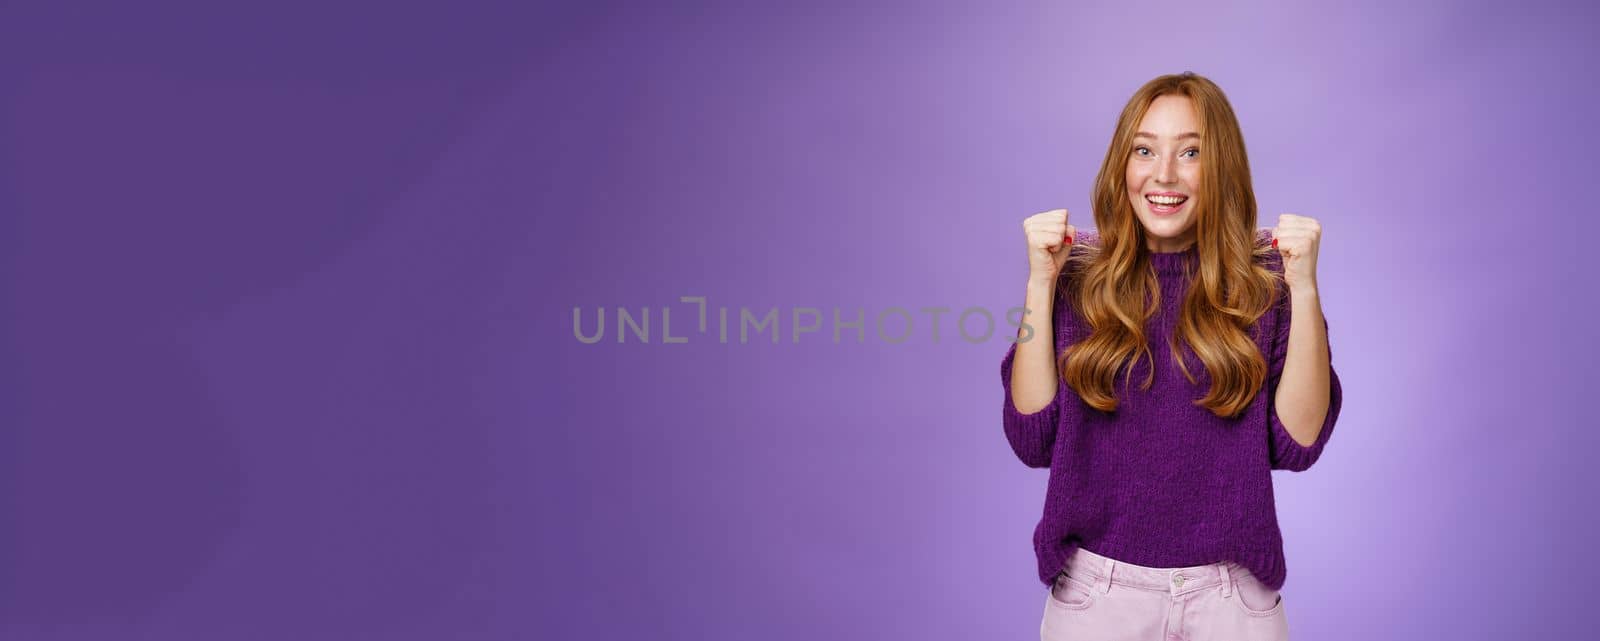 Yey we made it. Happy and cheerful young pretty redhead 20s girl in purple sweater over violet background raising clenched fists in joy and triumph, celebrating success and win, cheering. Body language and emotions concept